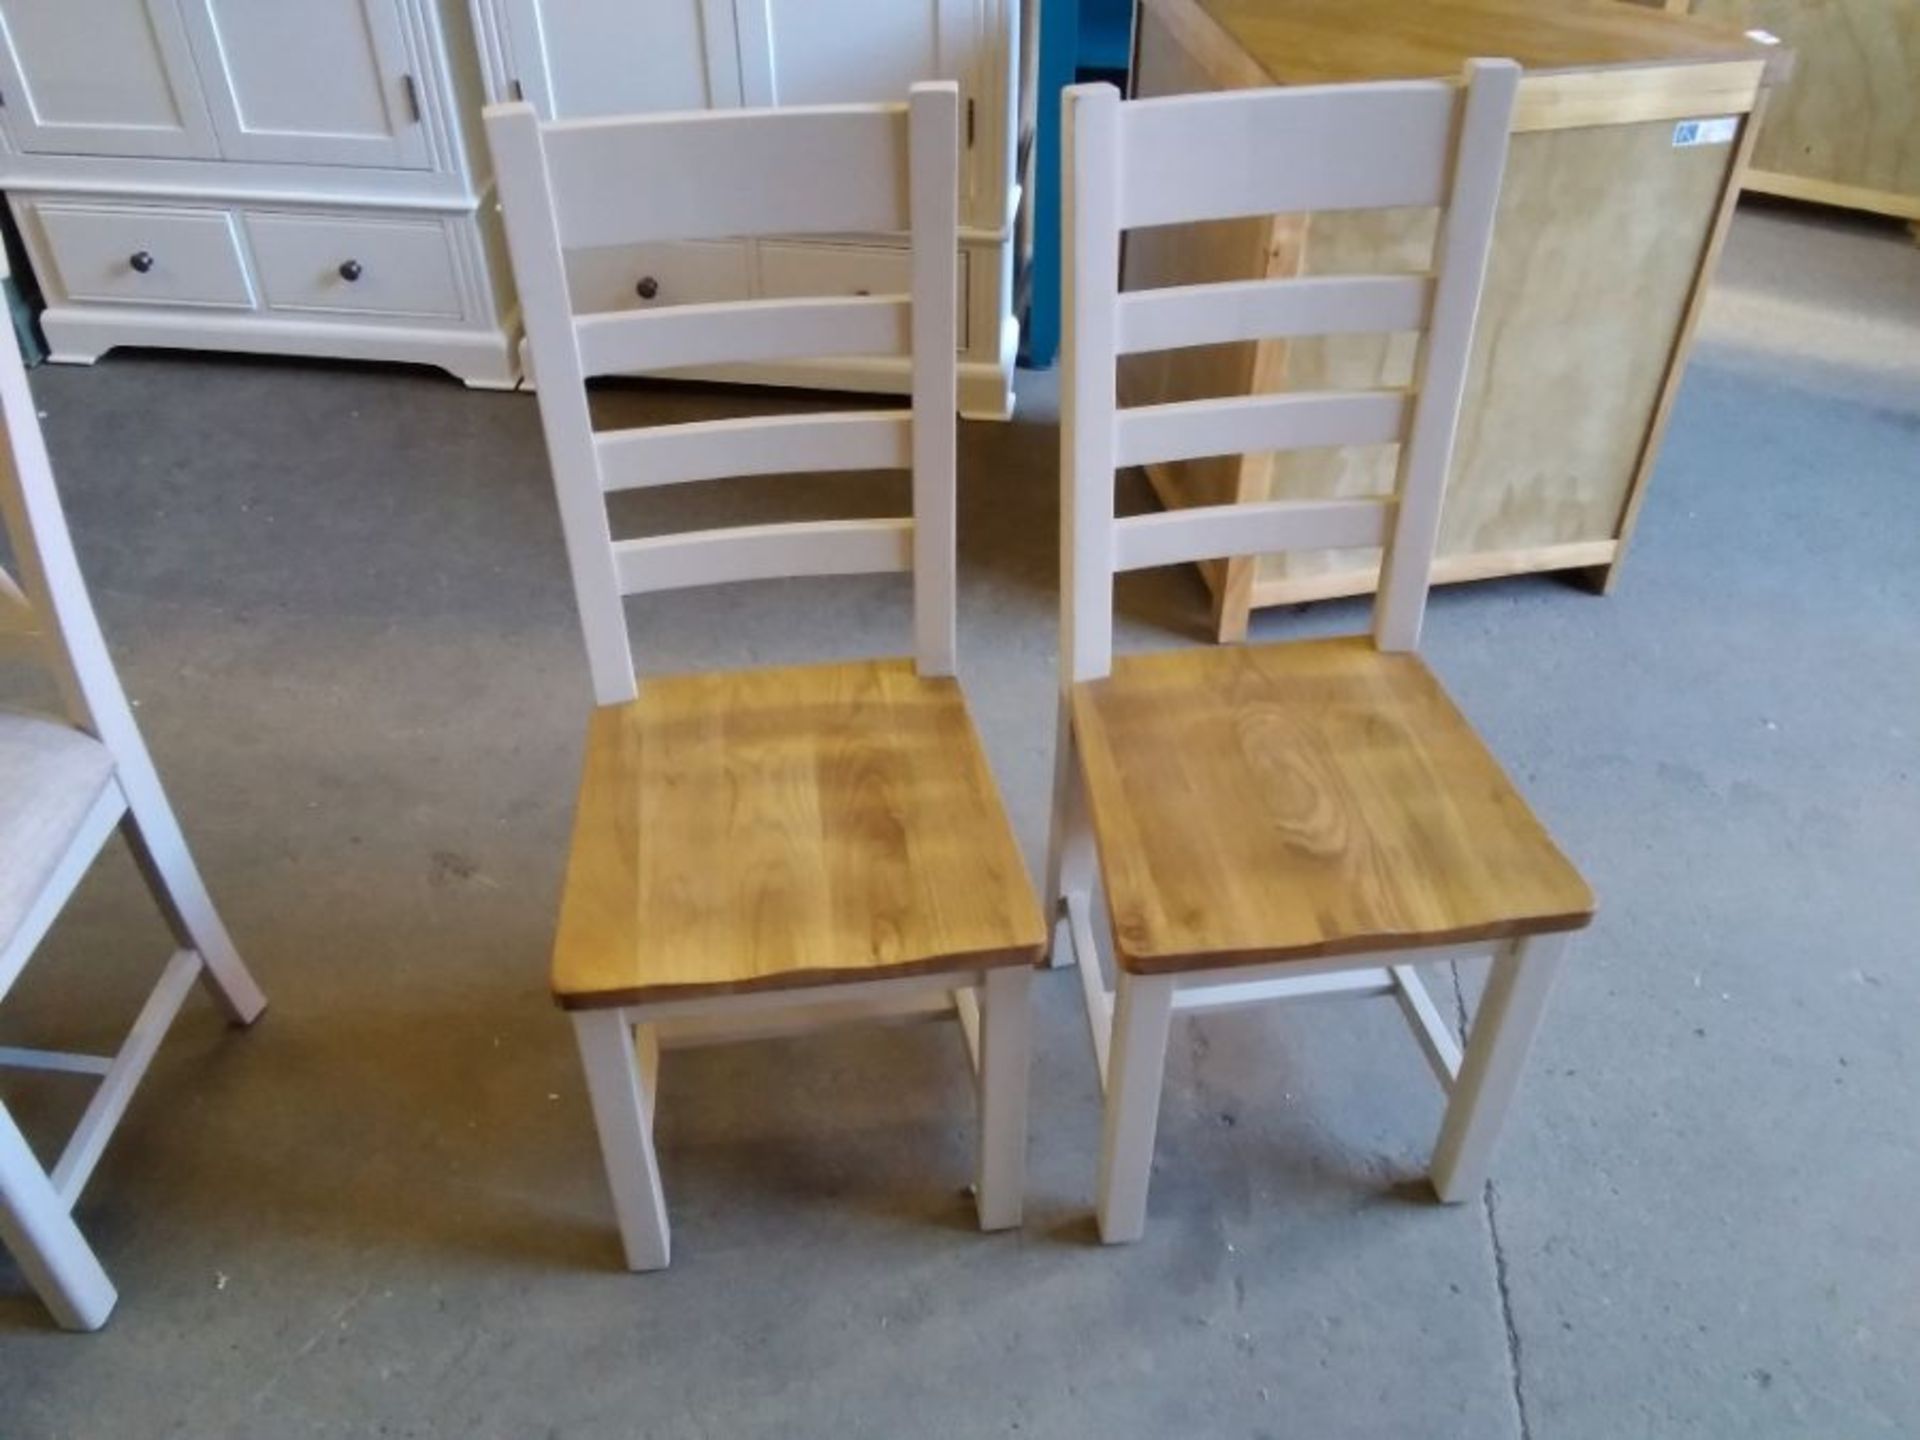 PAIR OF PAINTED DINING CHAIRS WITH WOODEN SEATS